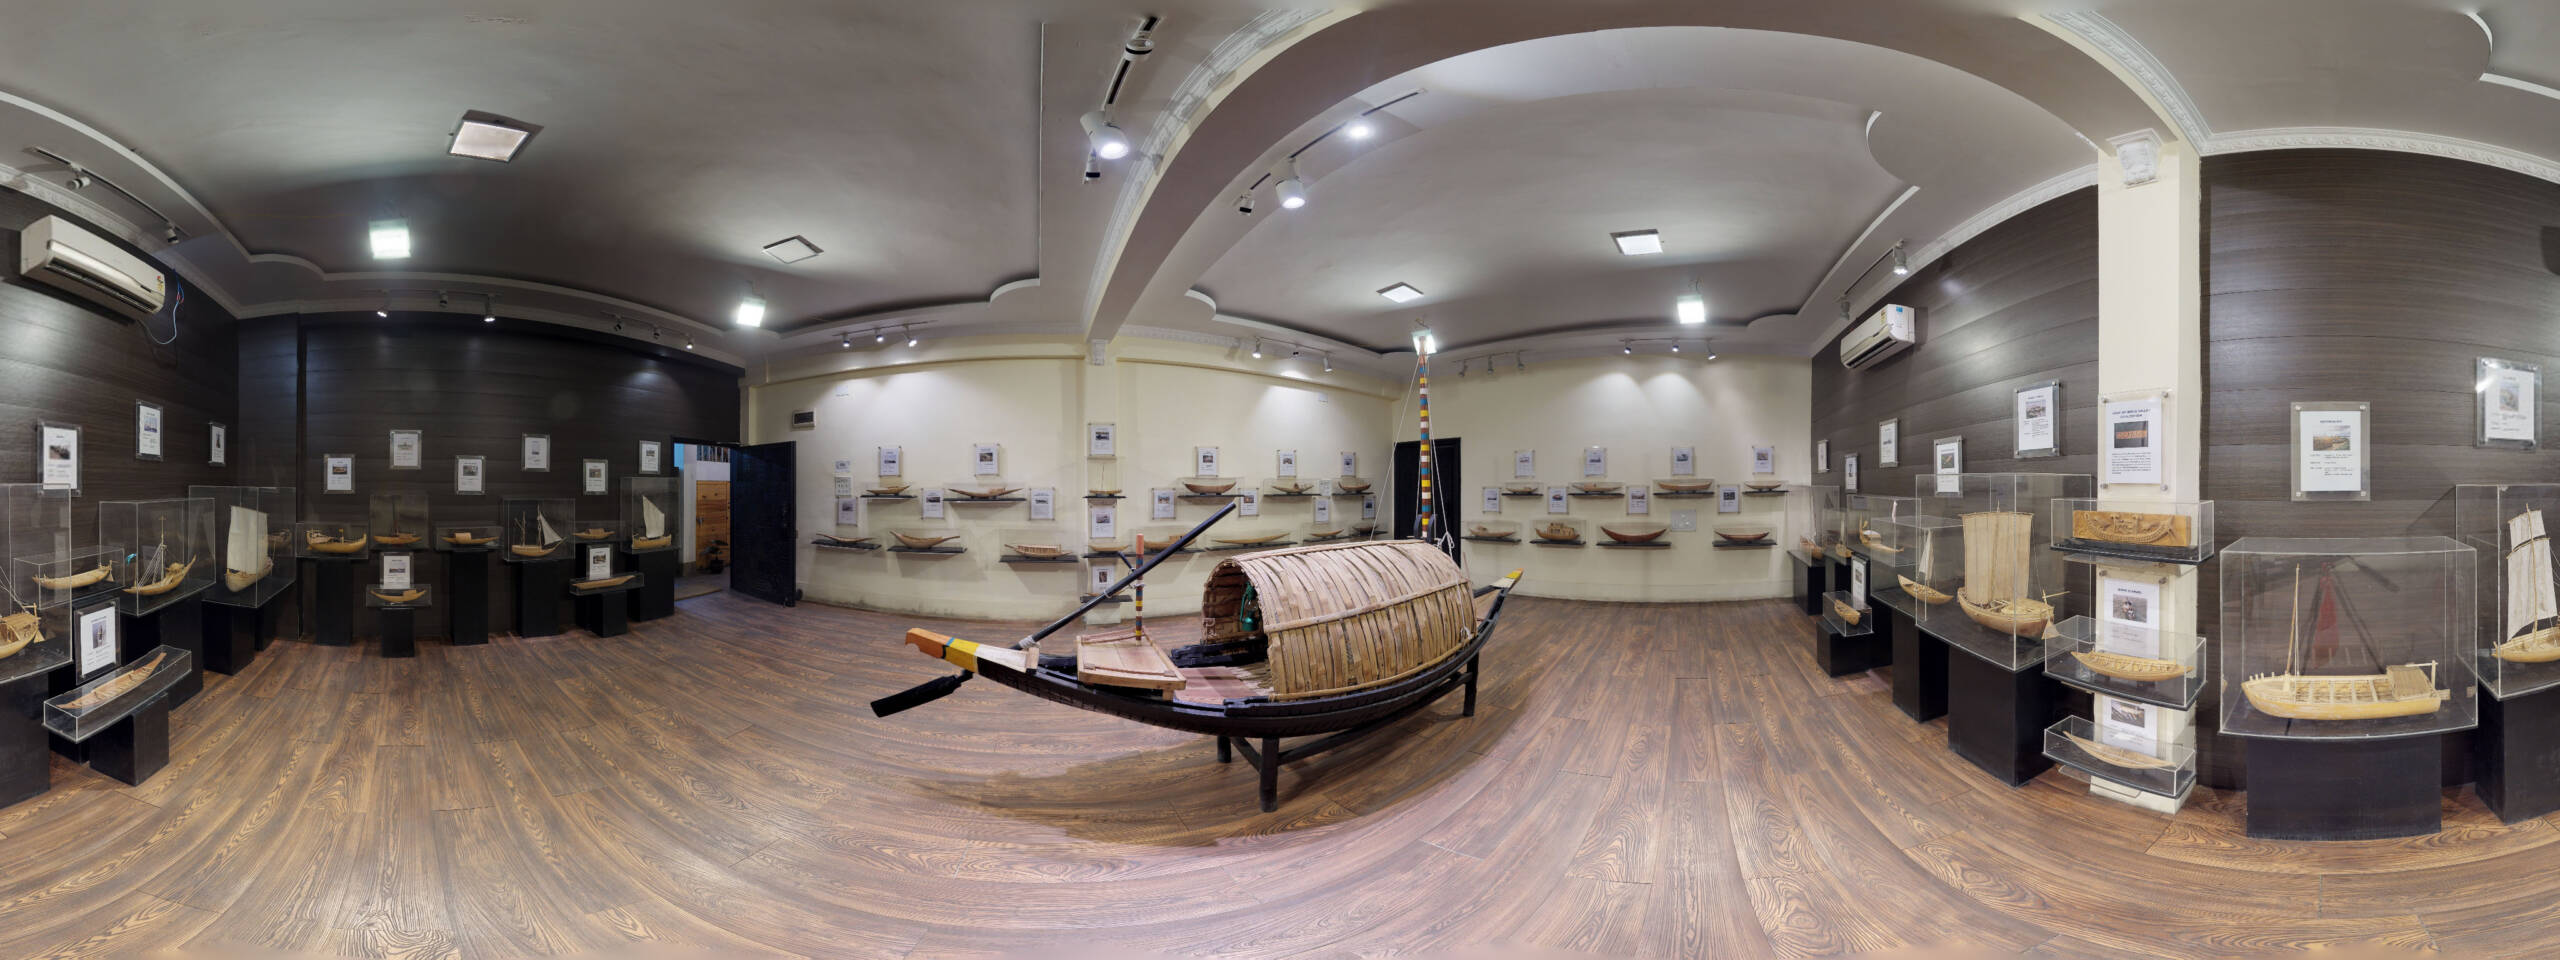 360 degree view of Boats of Bengal gallery of CRI Museum